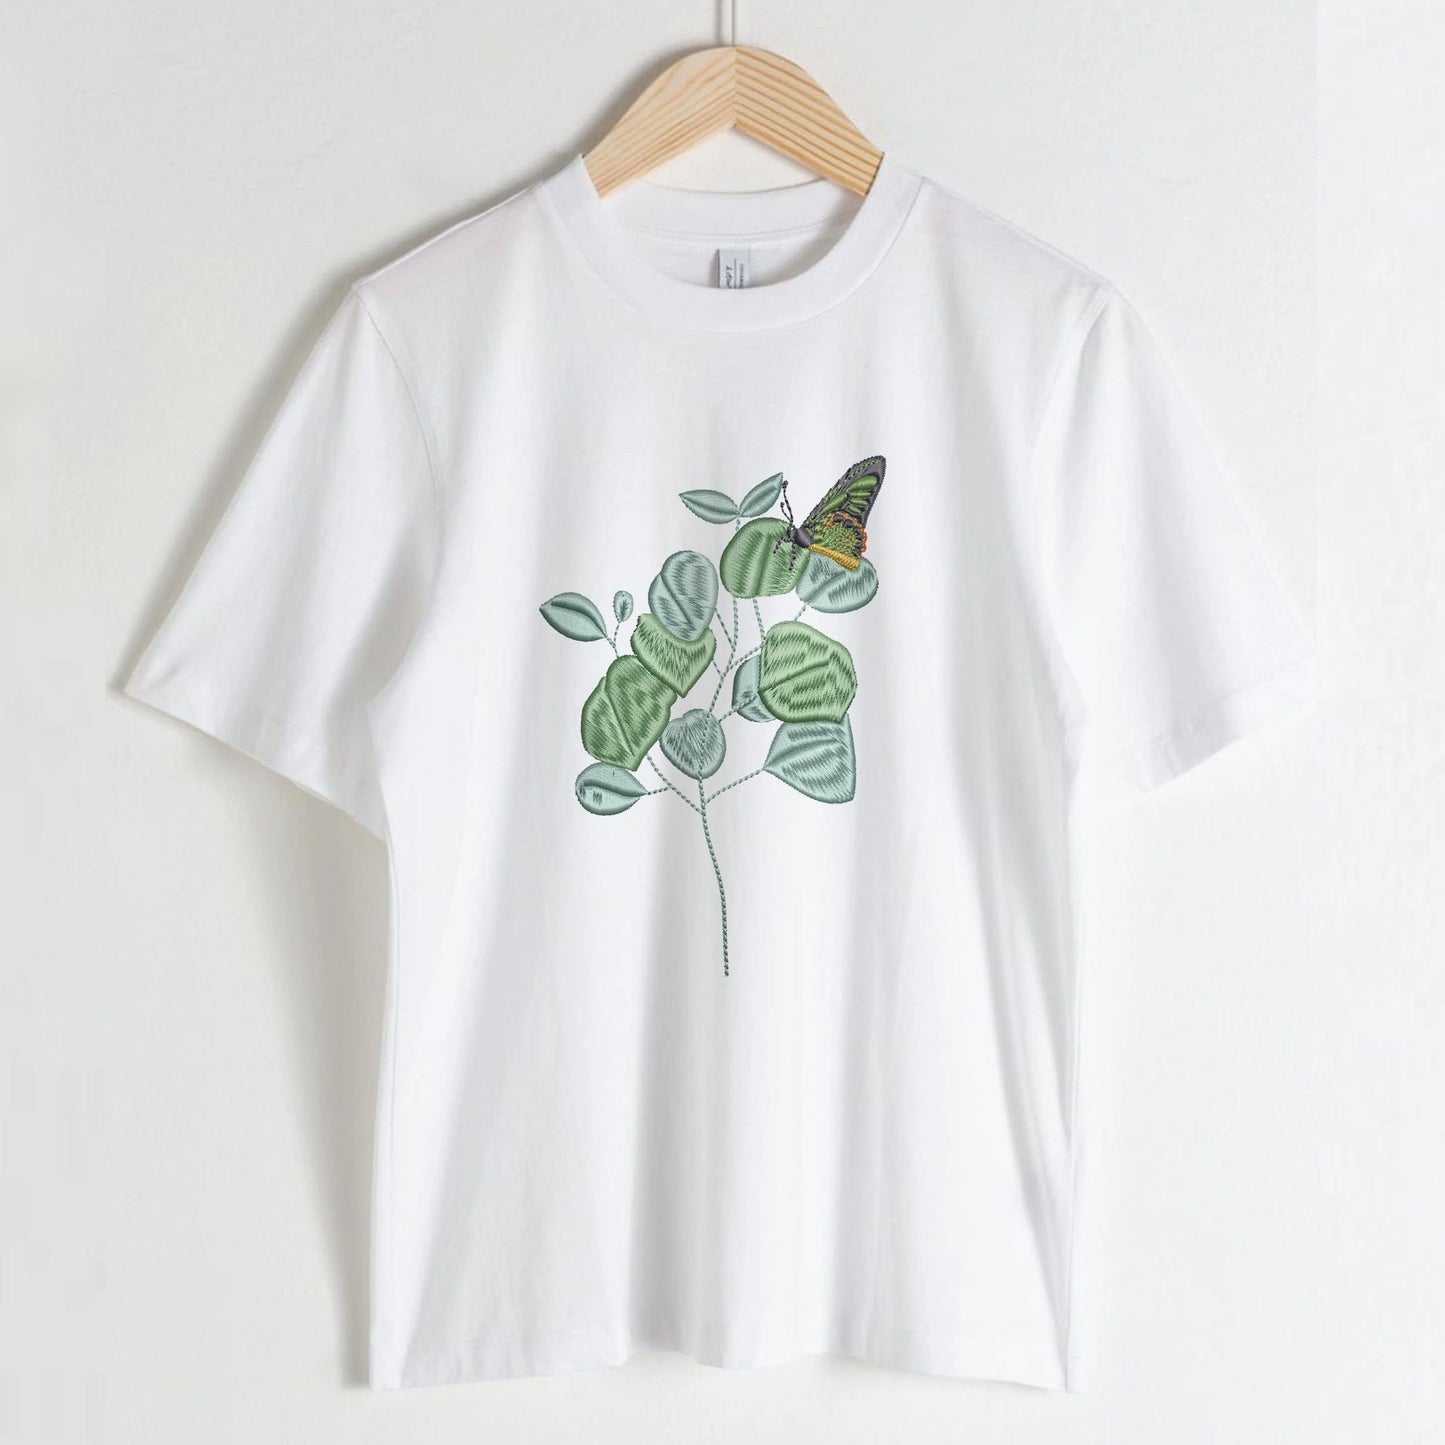 Flower Butterfly Machine Embroidery Design on t-shirt